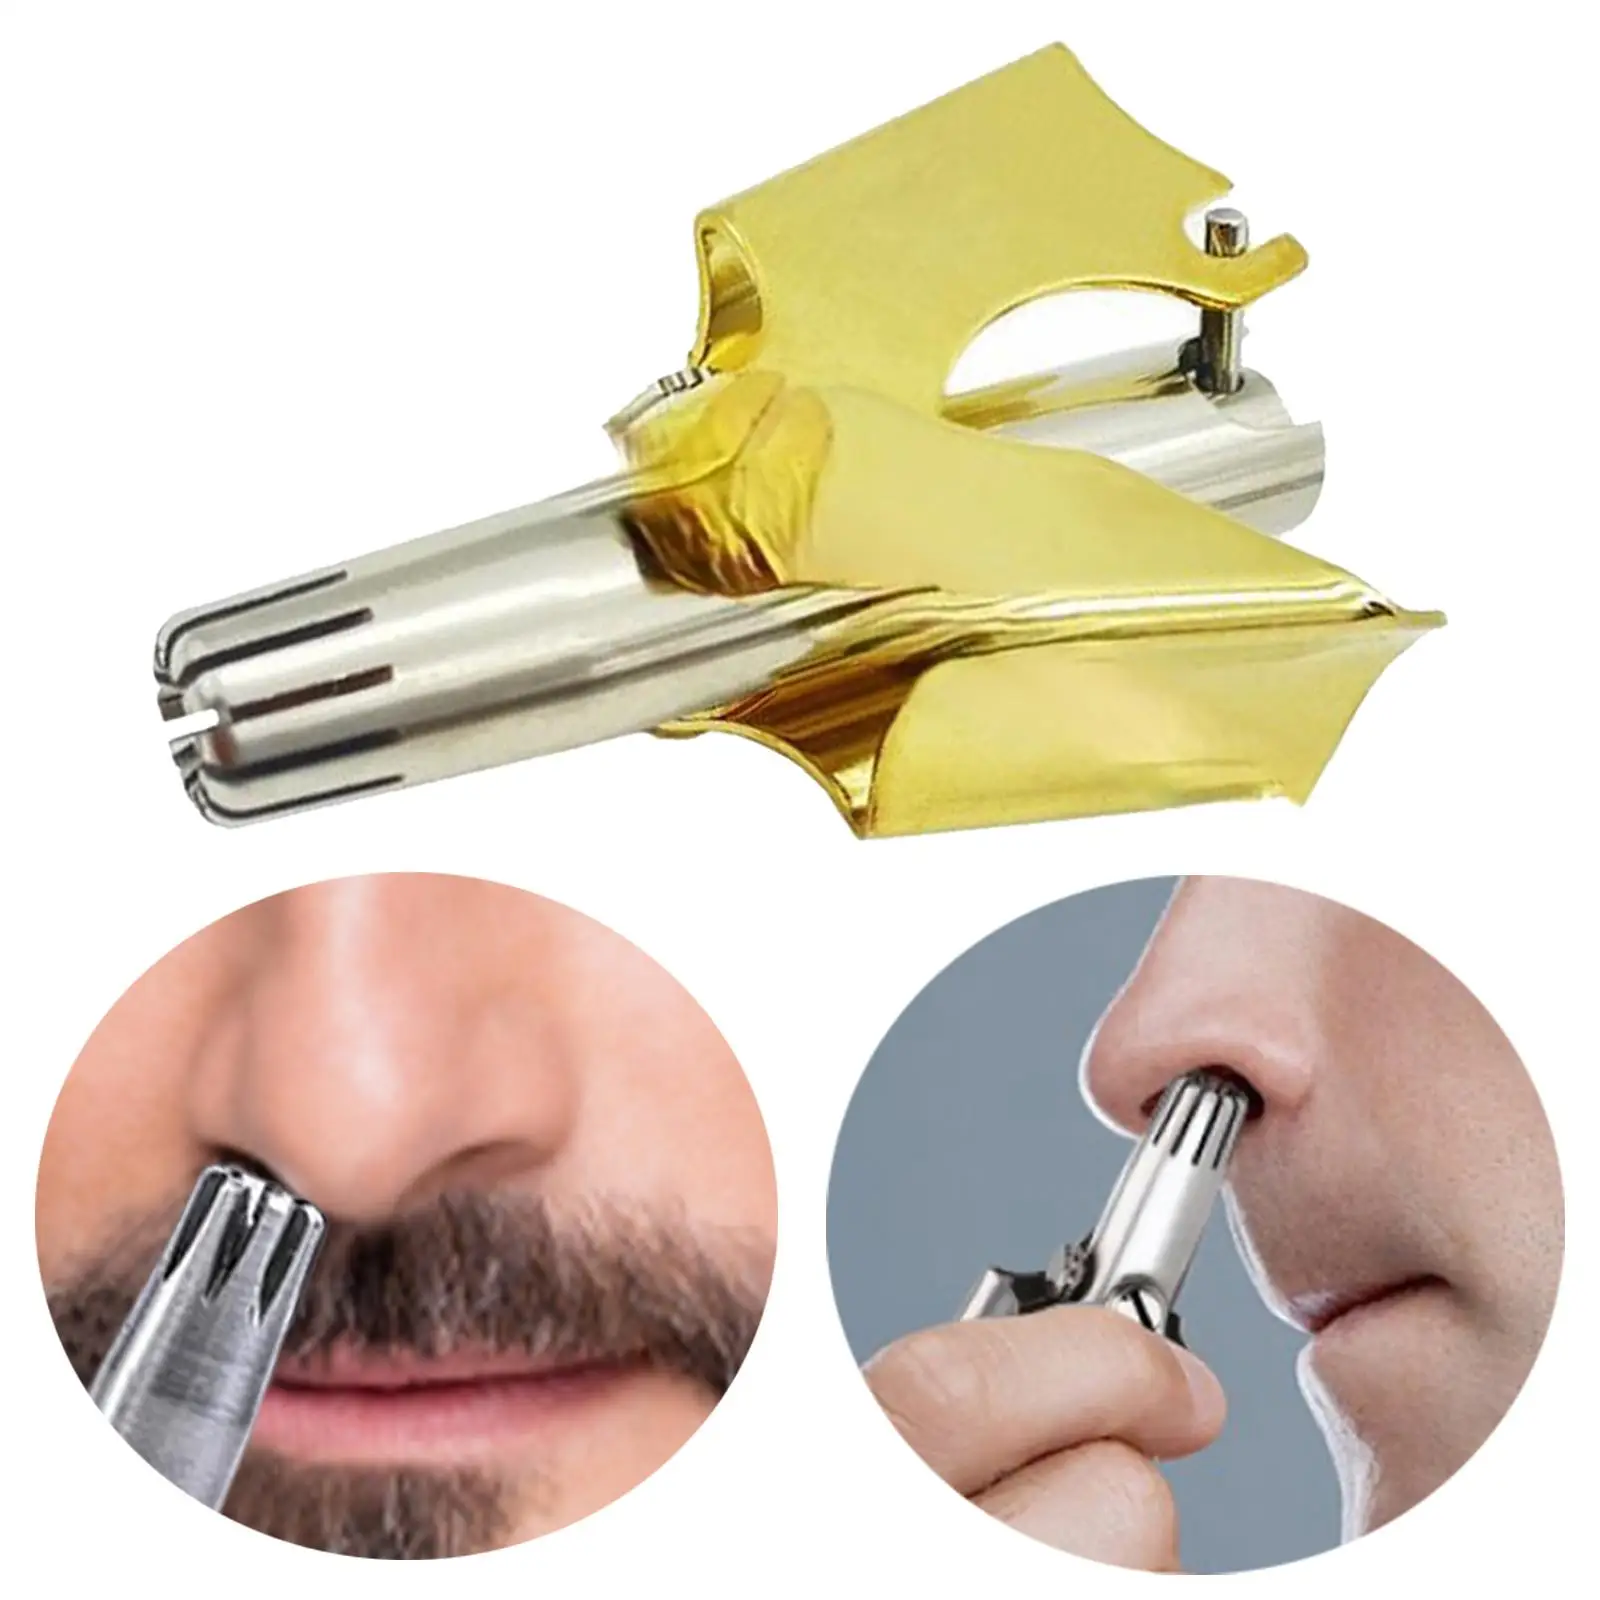 Manual Nose Trimmer Washable Stainless Steel Razor Shaver No Batteries Required Ear Hair Cutter Low Manual Noise for Men Gold